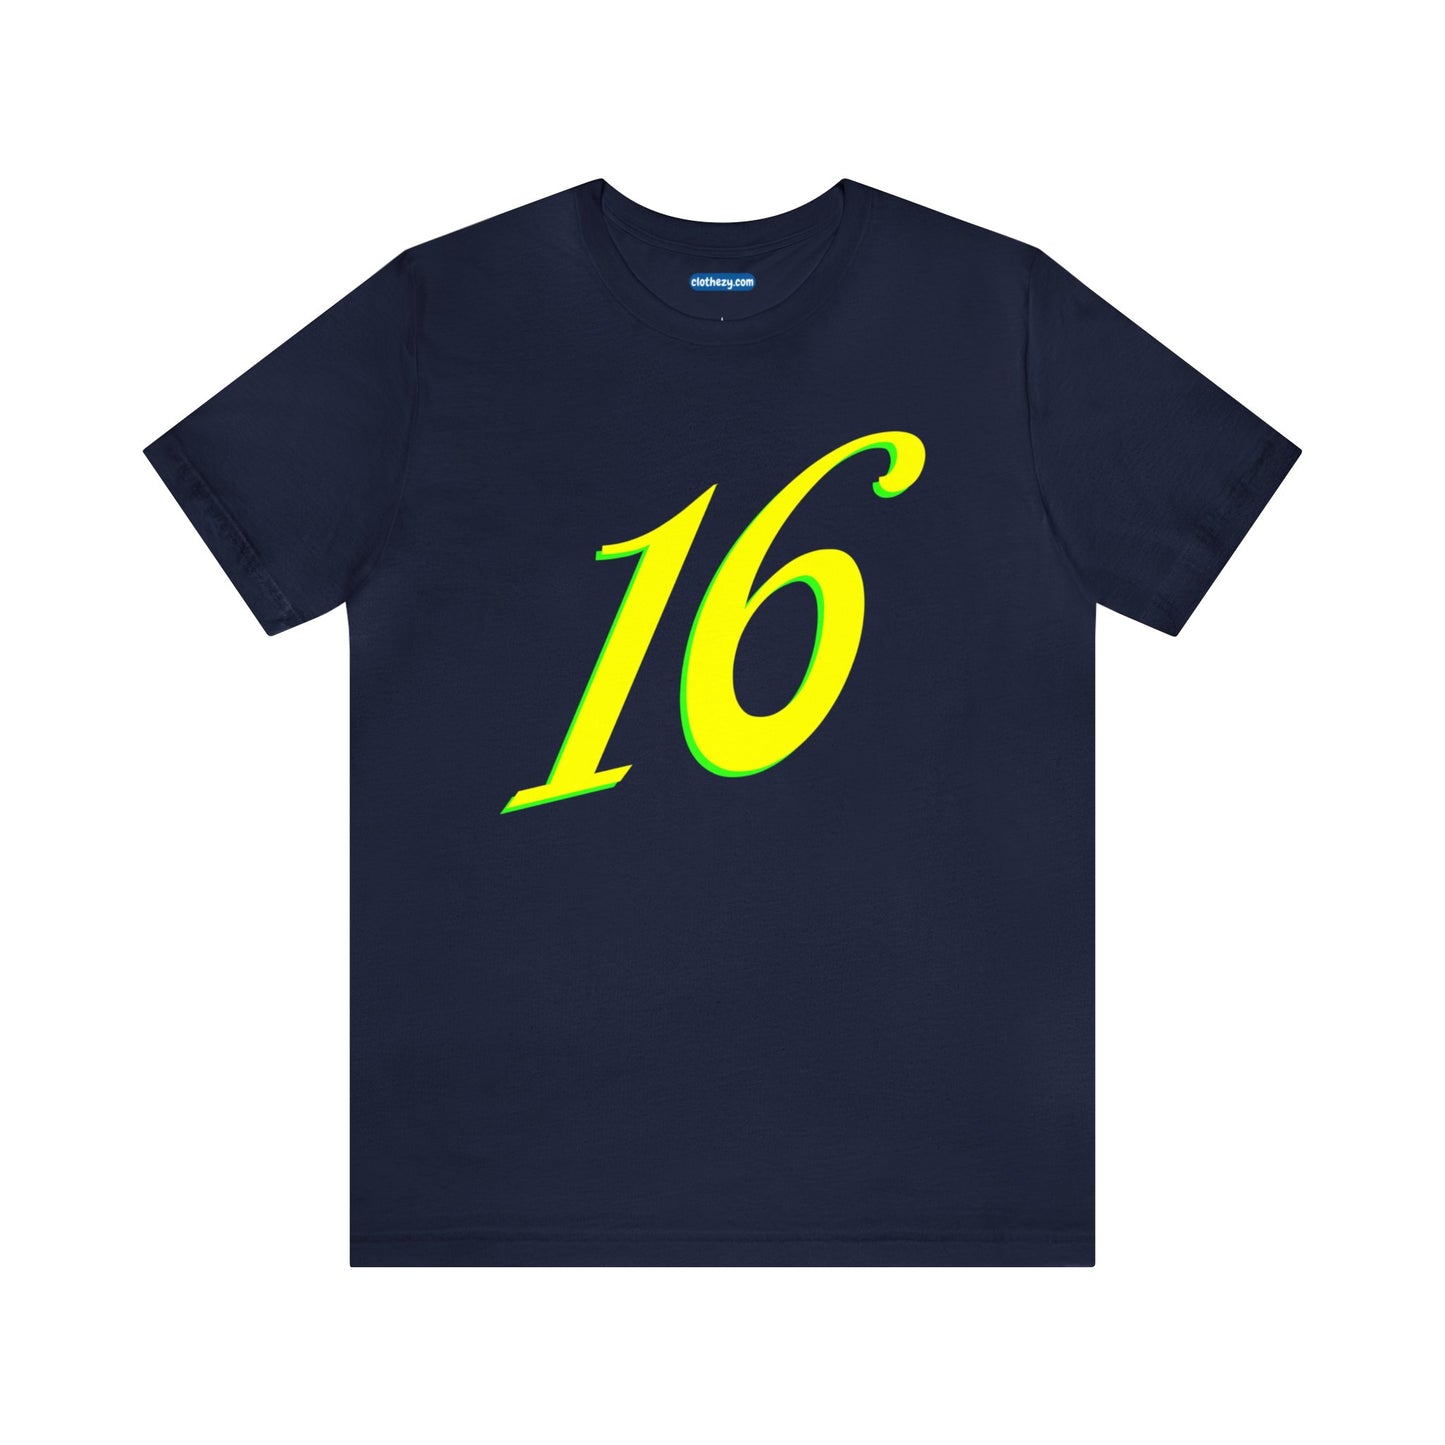 Number 16 Design - Soft Cotton Tee for birthdays and celebrations, Gift for friends and family, Multiple Options by clothezy.com in Orange Size Small - Buy Now